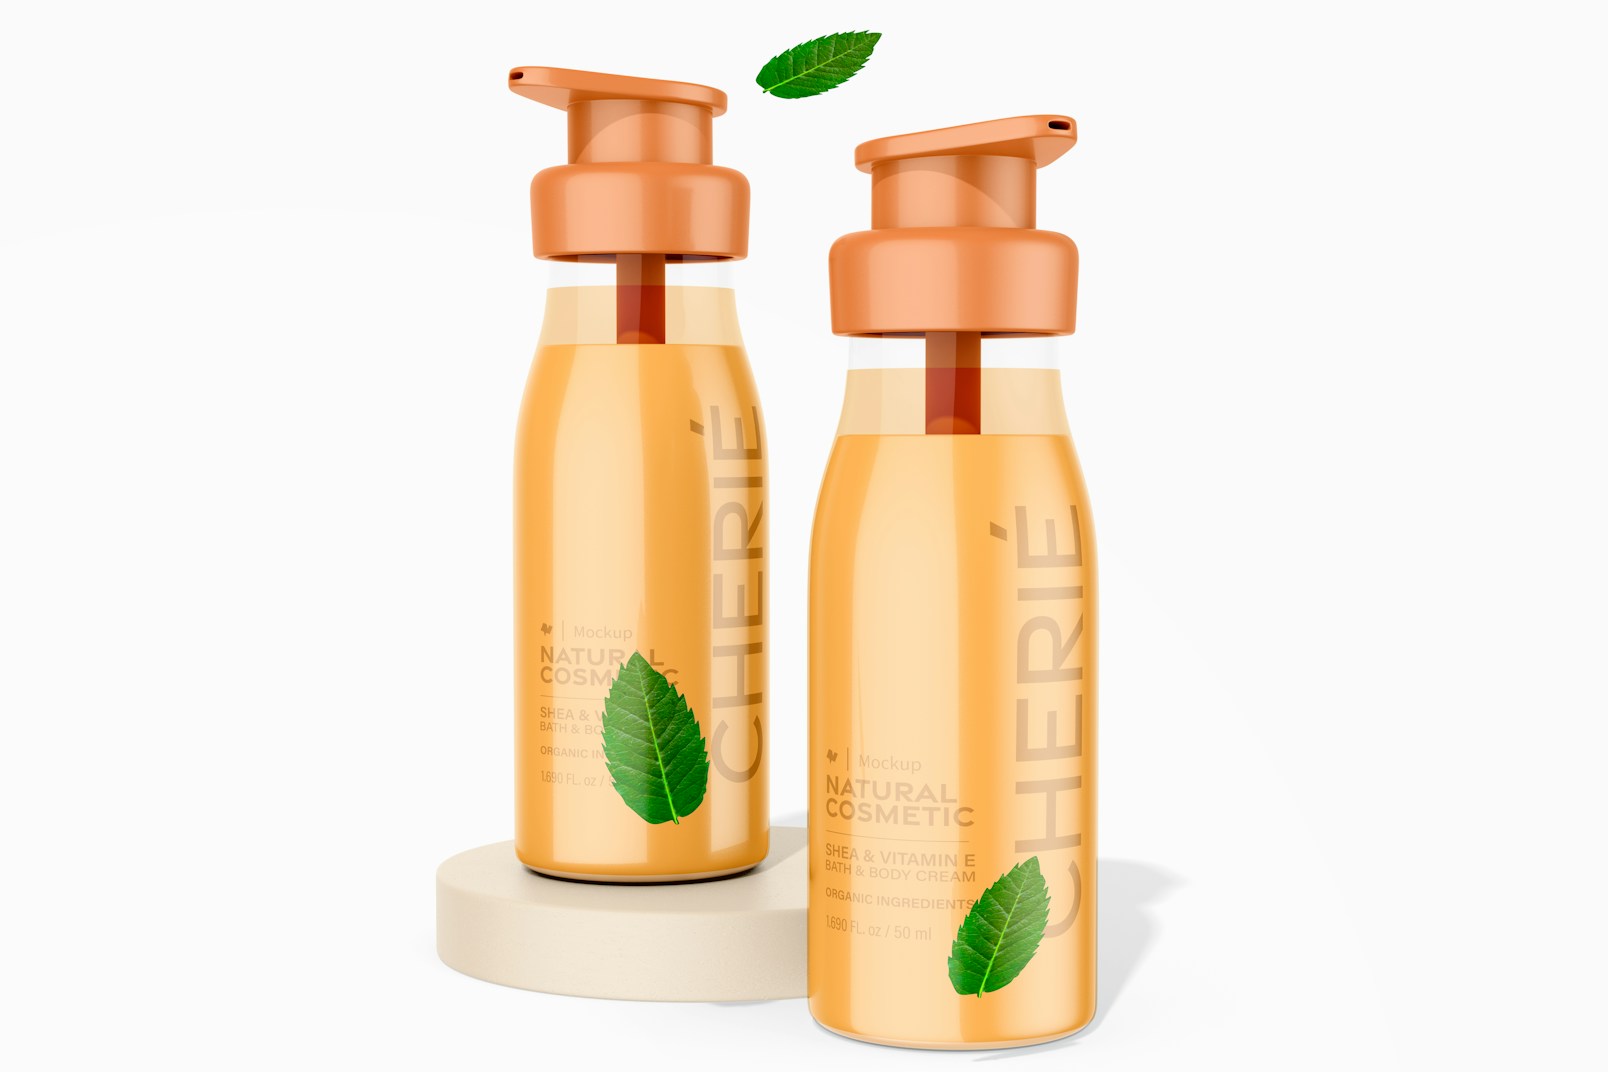 Body Cream Plastic Bottles Mockup, Dropped and Standing